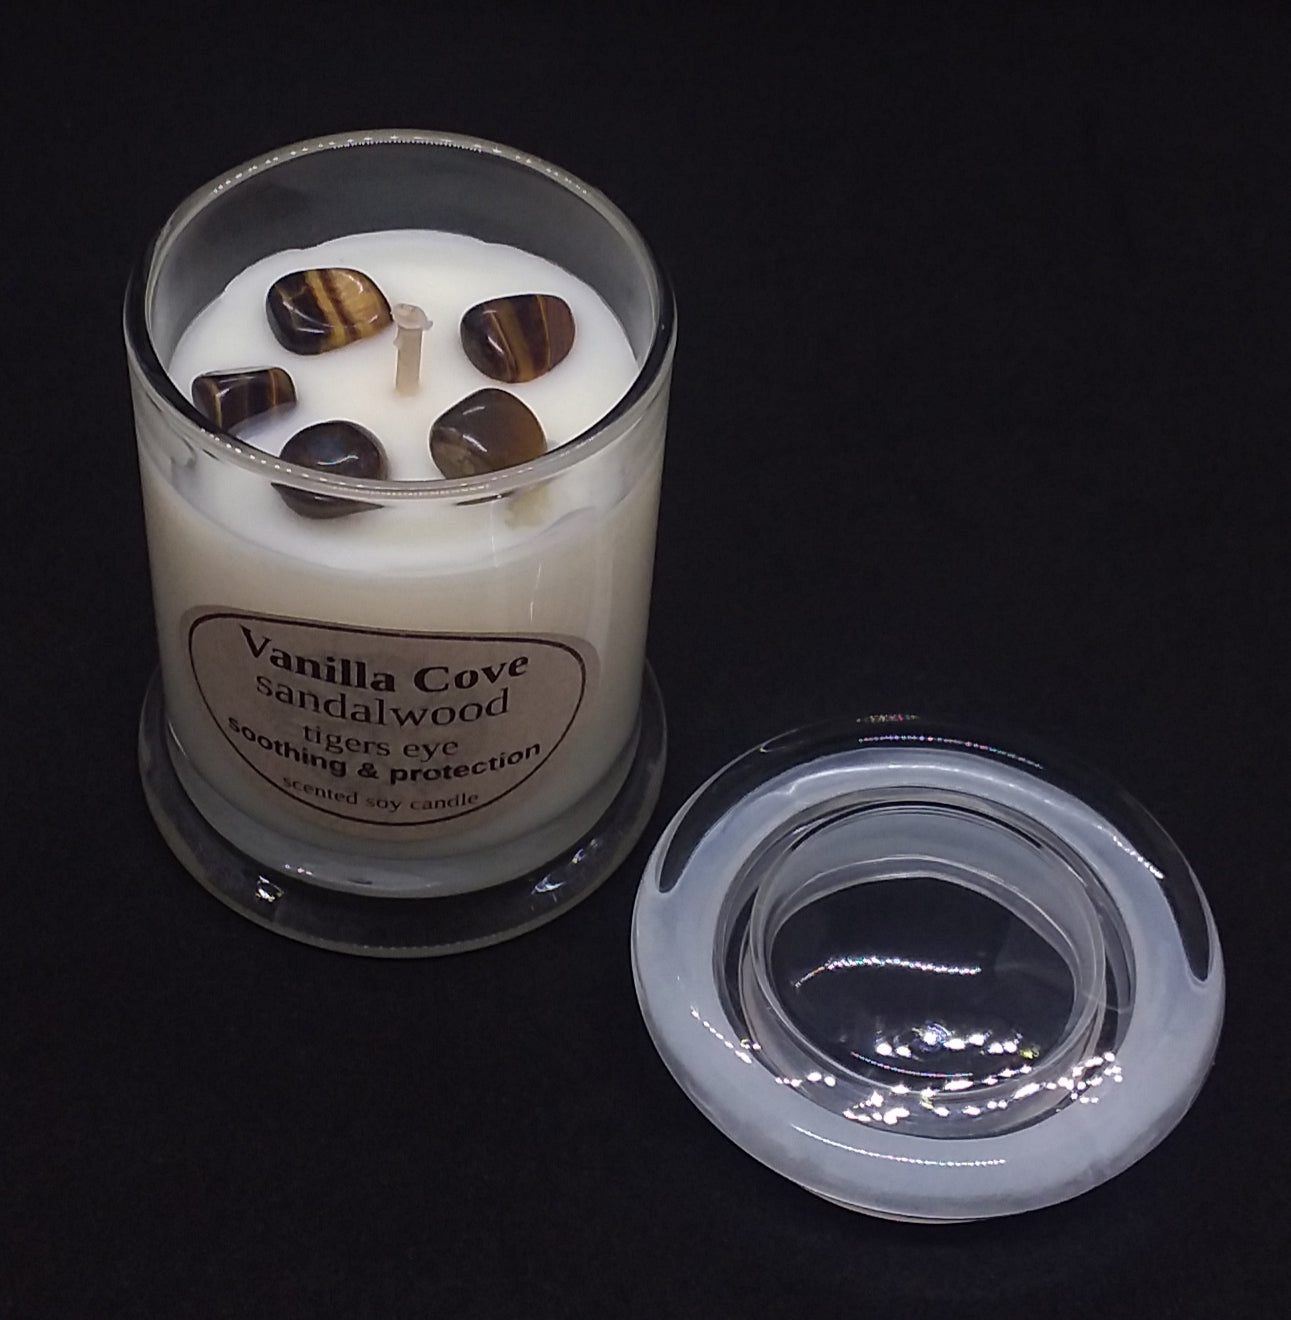 Vanilla Cove Soy Candle 45 hour Sandalwood fragrance with Tigers Eye crystals in clear glass jar and glass lid